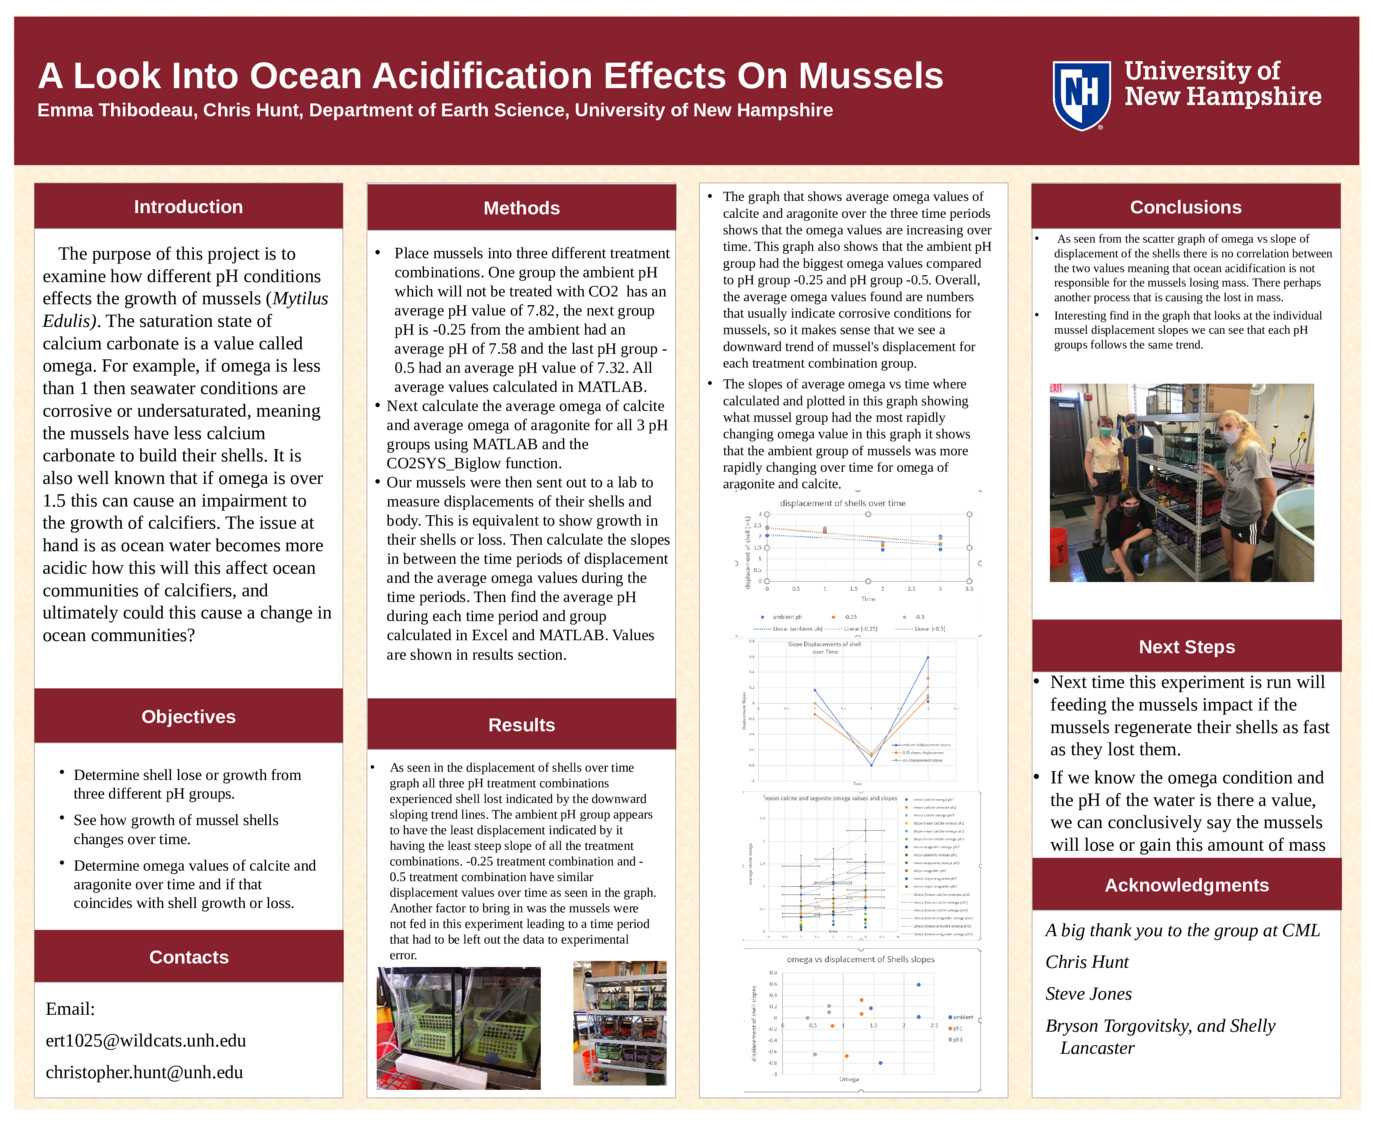 A Look Into Ocean Acidification Effects On Mussels by ert1025